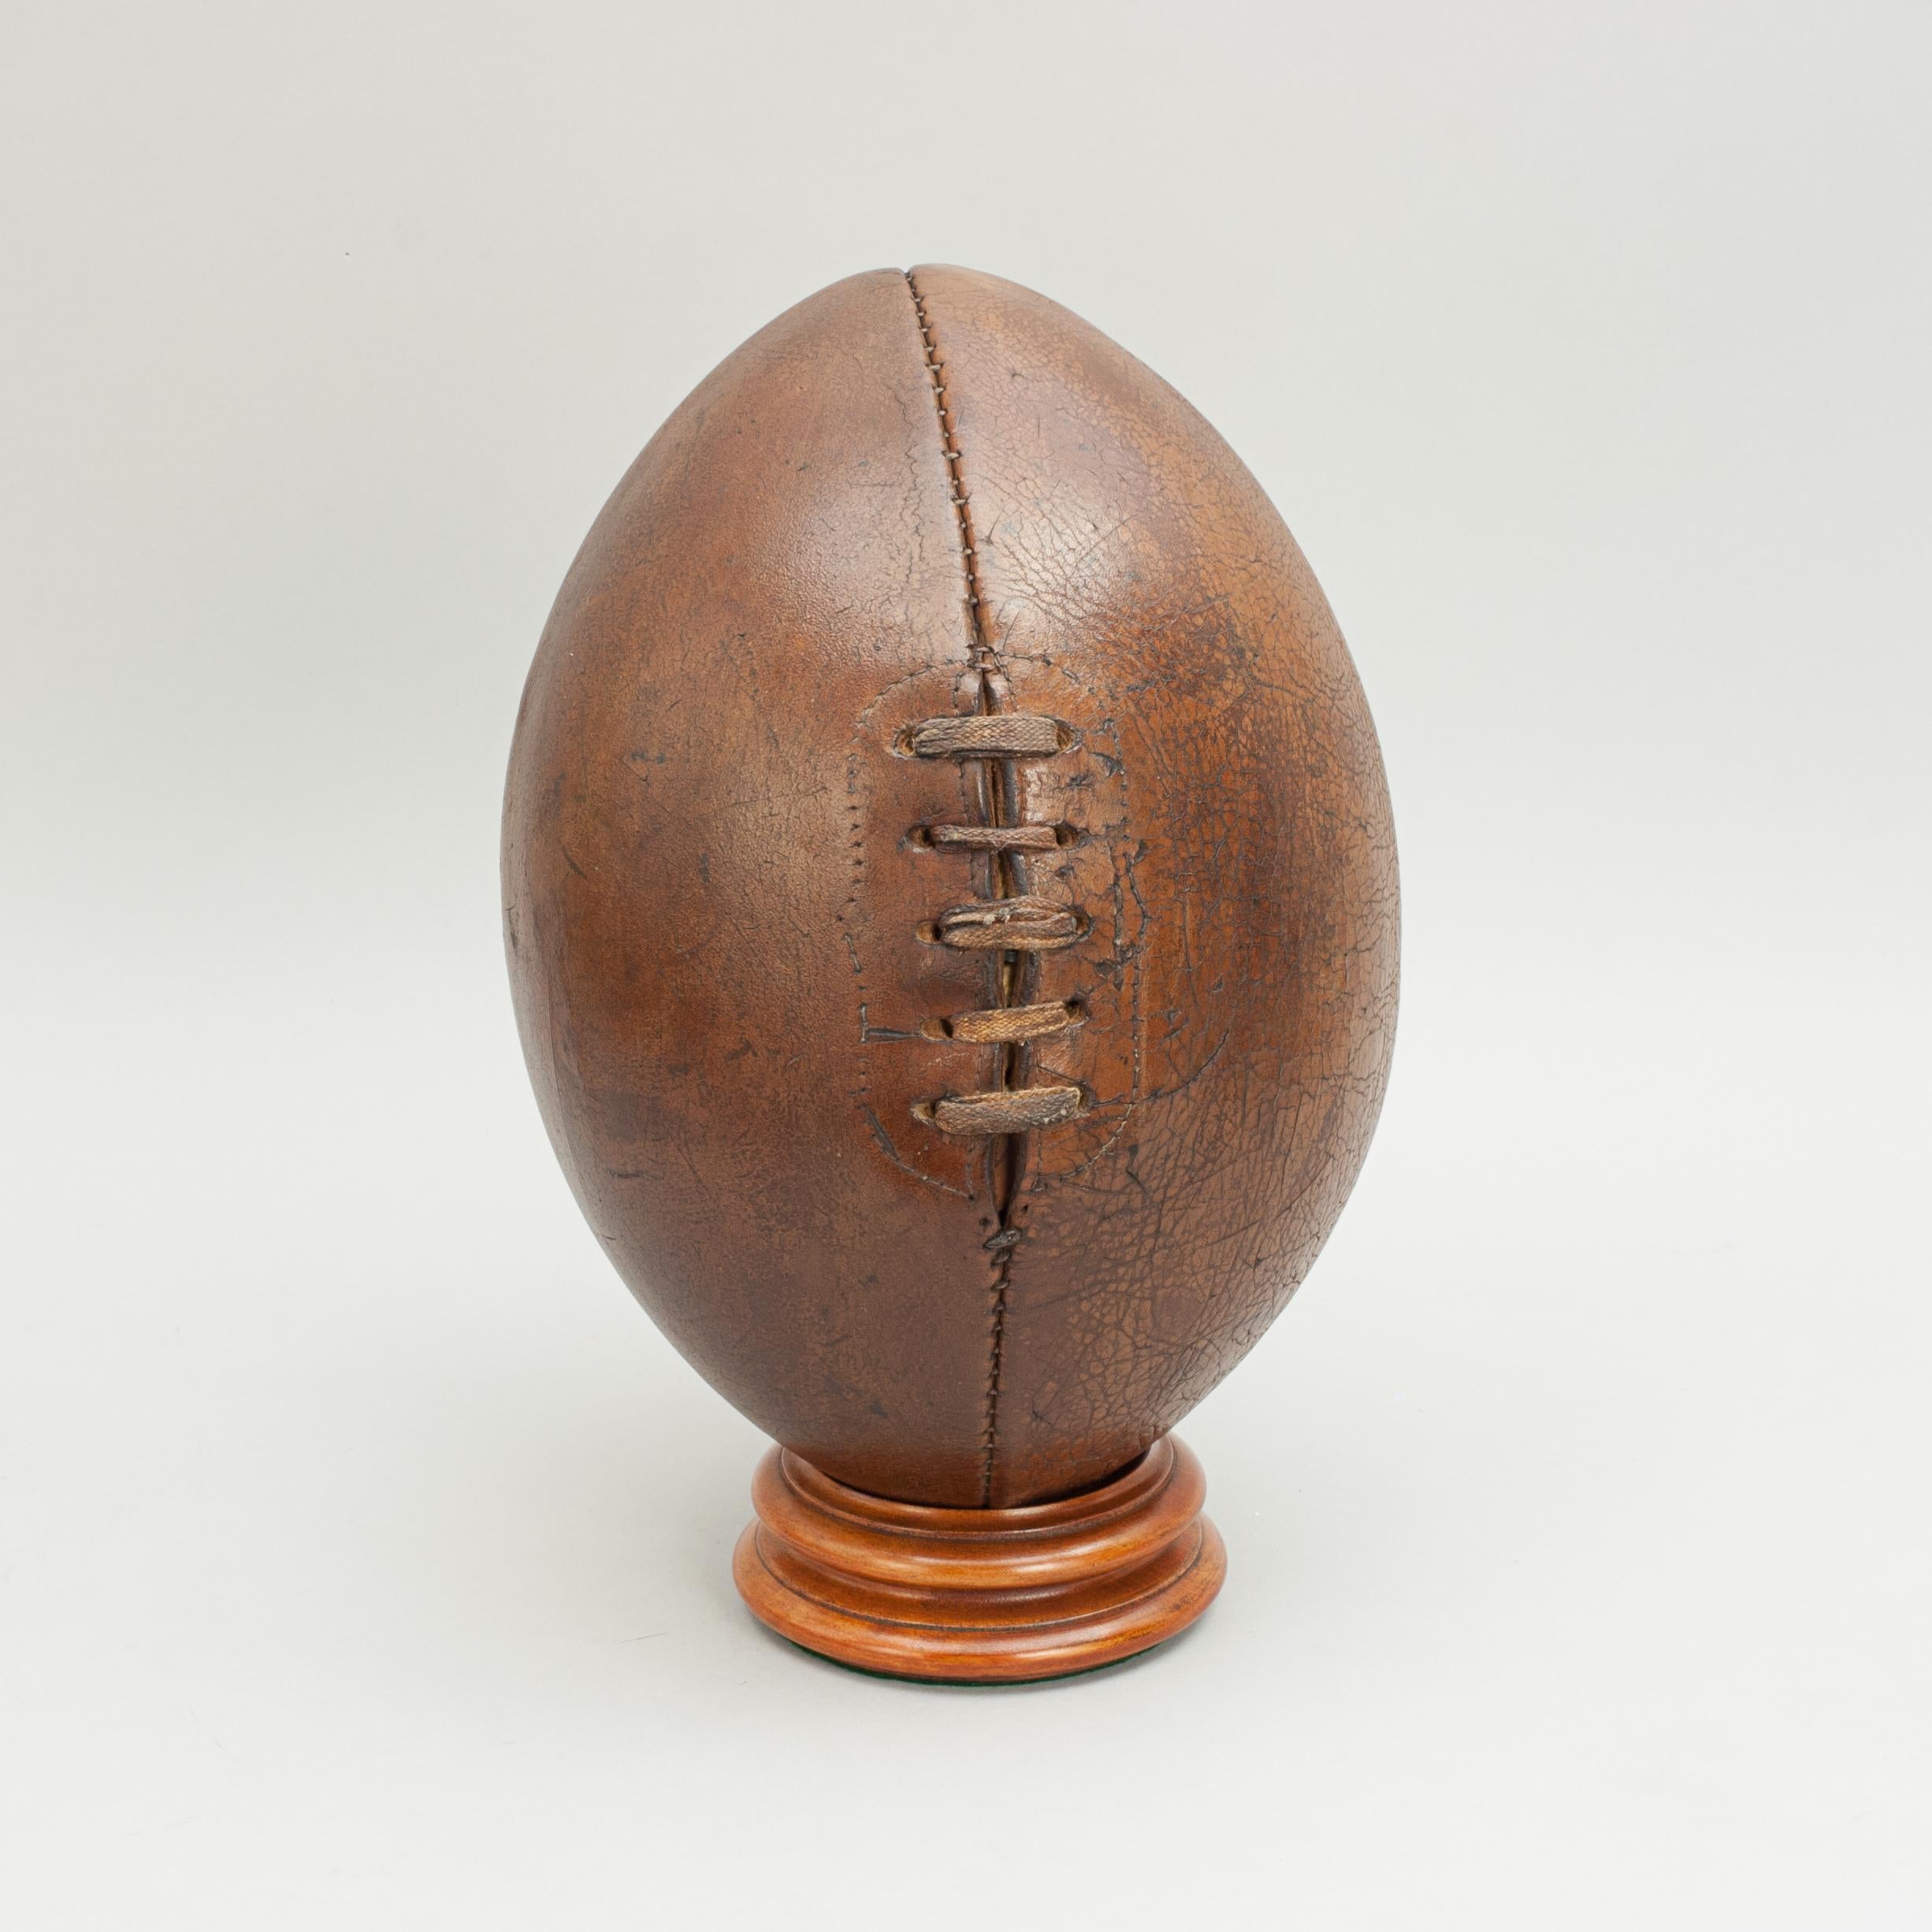 Vintage leather rugby ball.
A traditional four panel leather rugby ball with a lace-up slit to the top and valve for bladder inflation. The ball is with good dark brown colour and patination. The ends of the ball are semi-round.

Stand sold